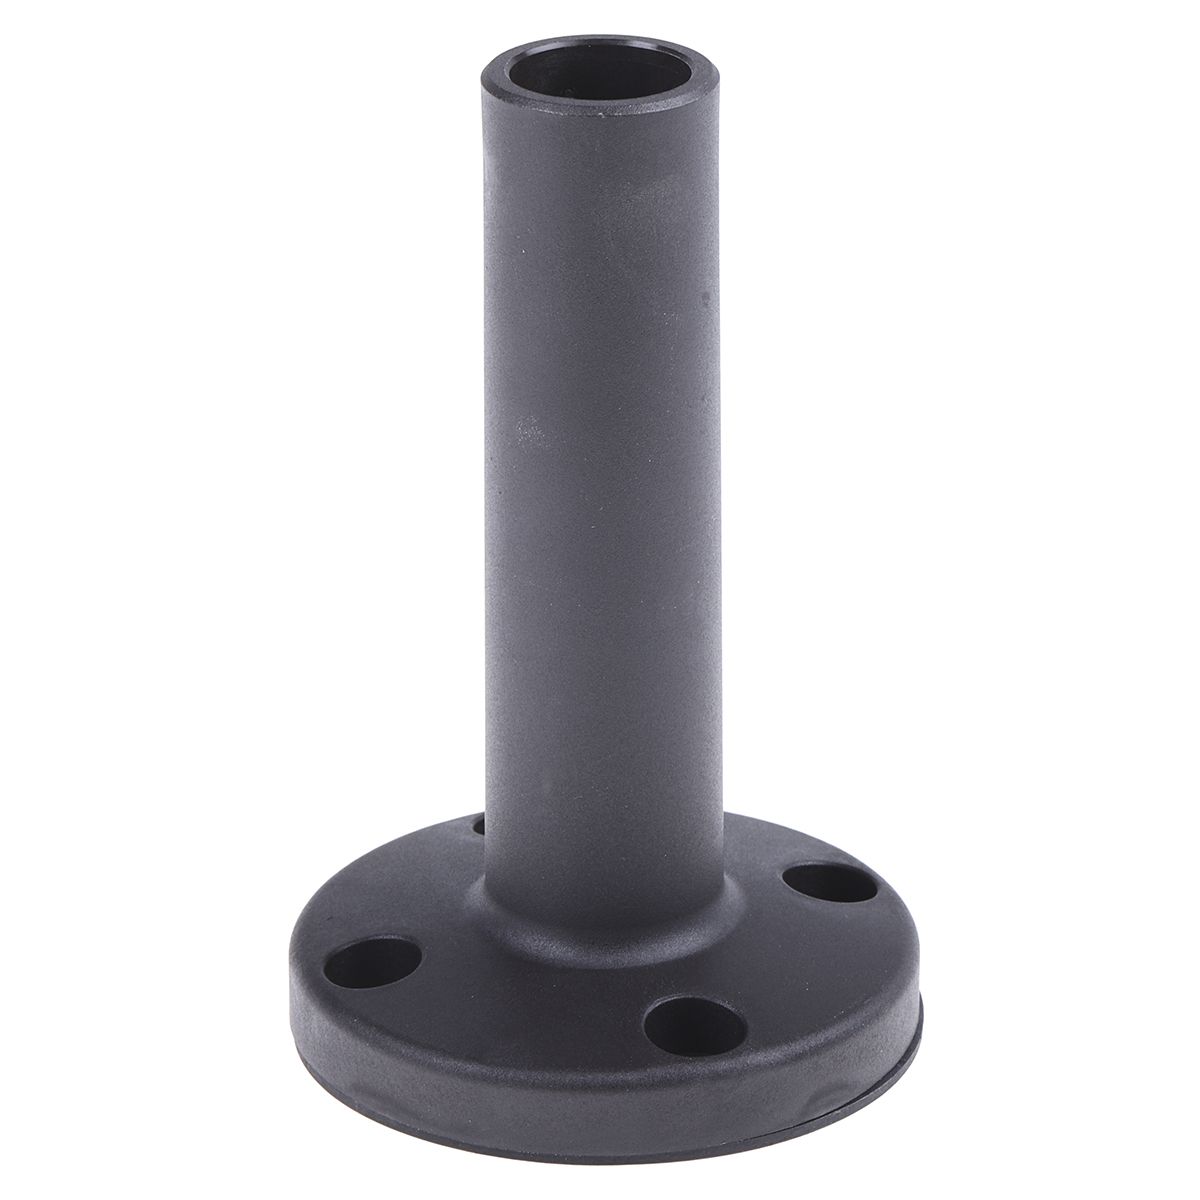 Werma Mounting Base with Tube for Use with KombiSIGN 70/71